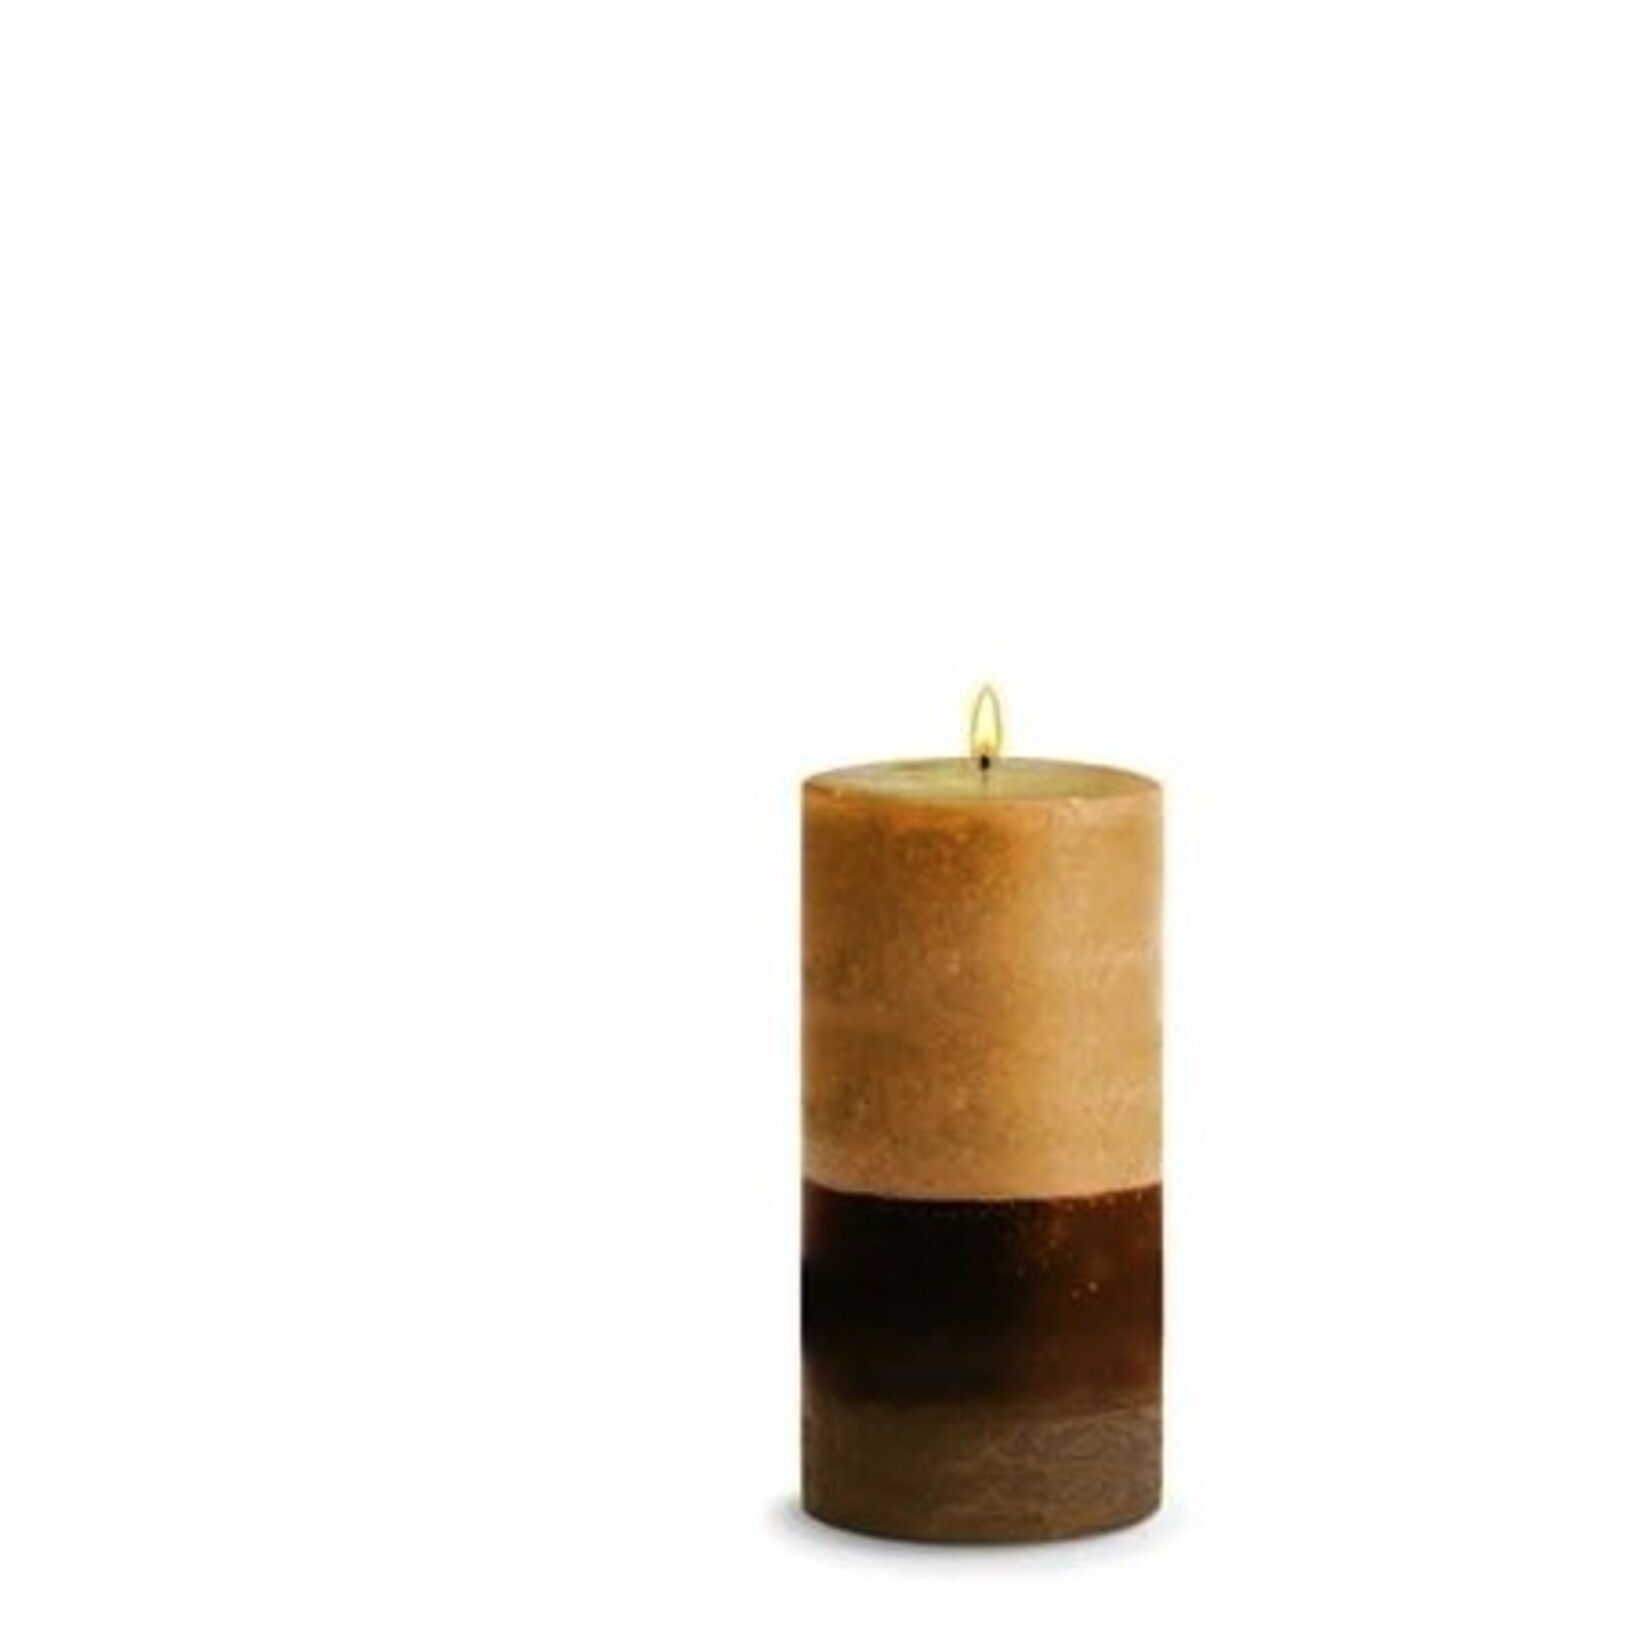 STONE CANDLES STONE PILLER CANDLES 3X6 HONEYSUCKLE SQ